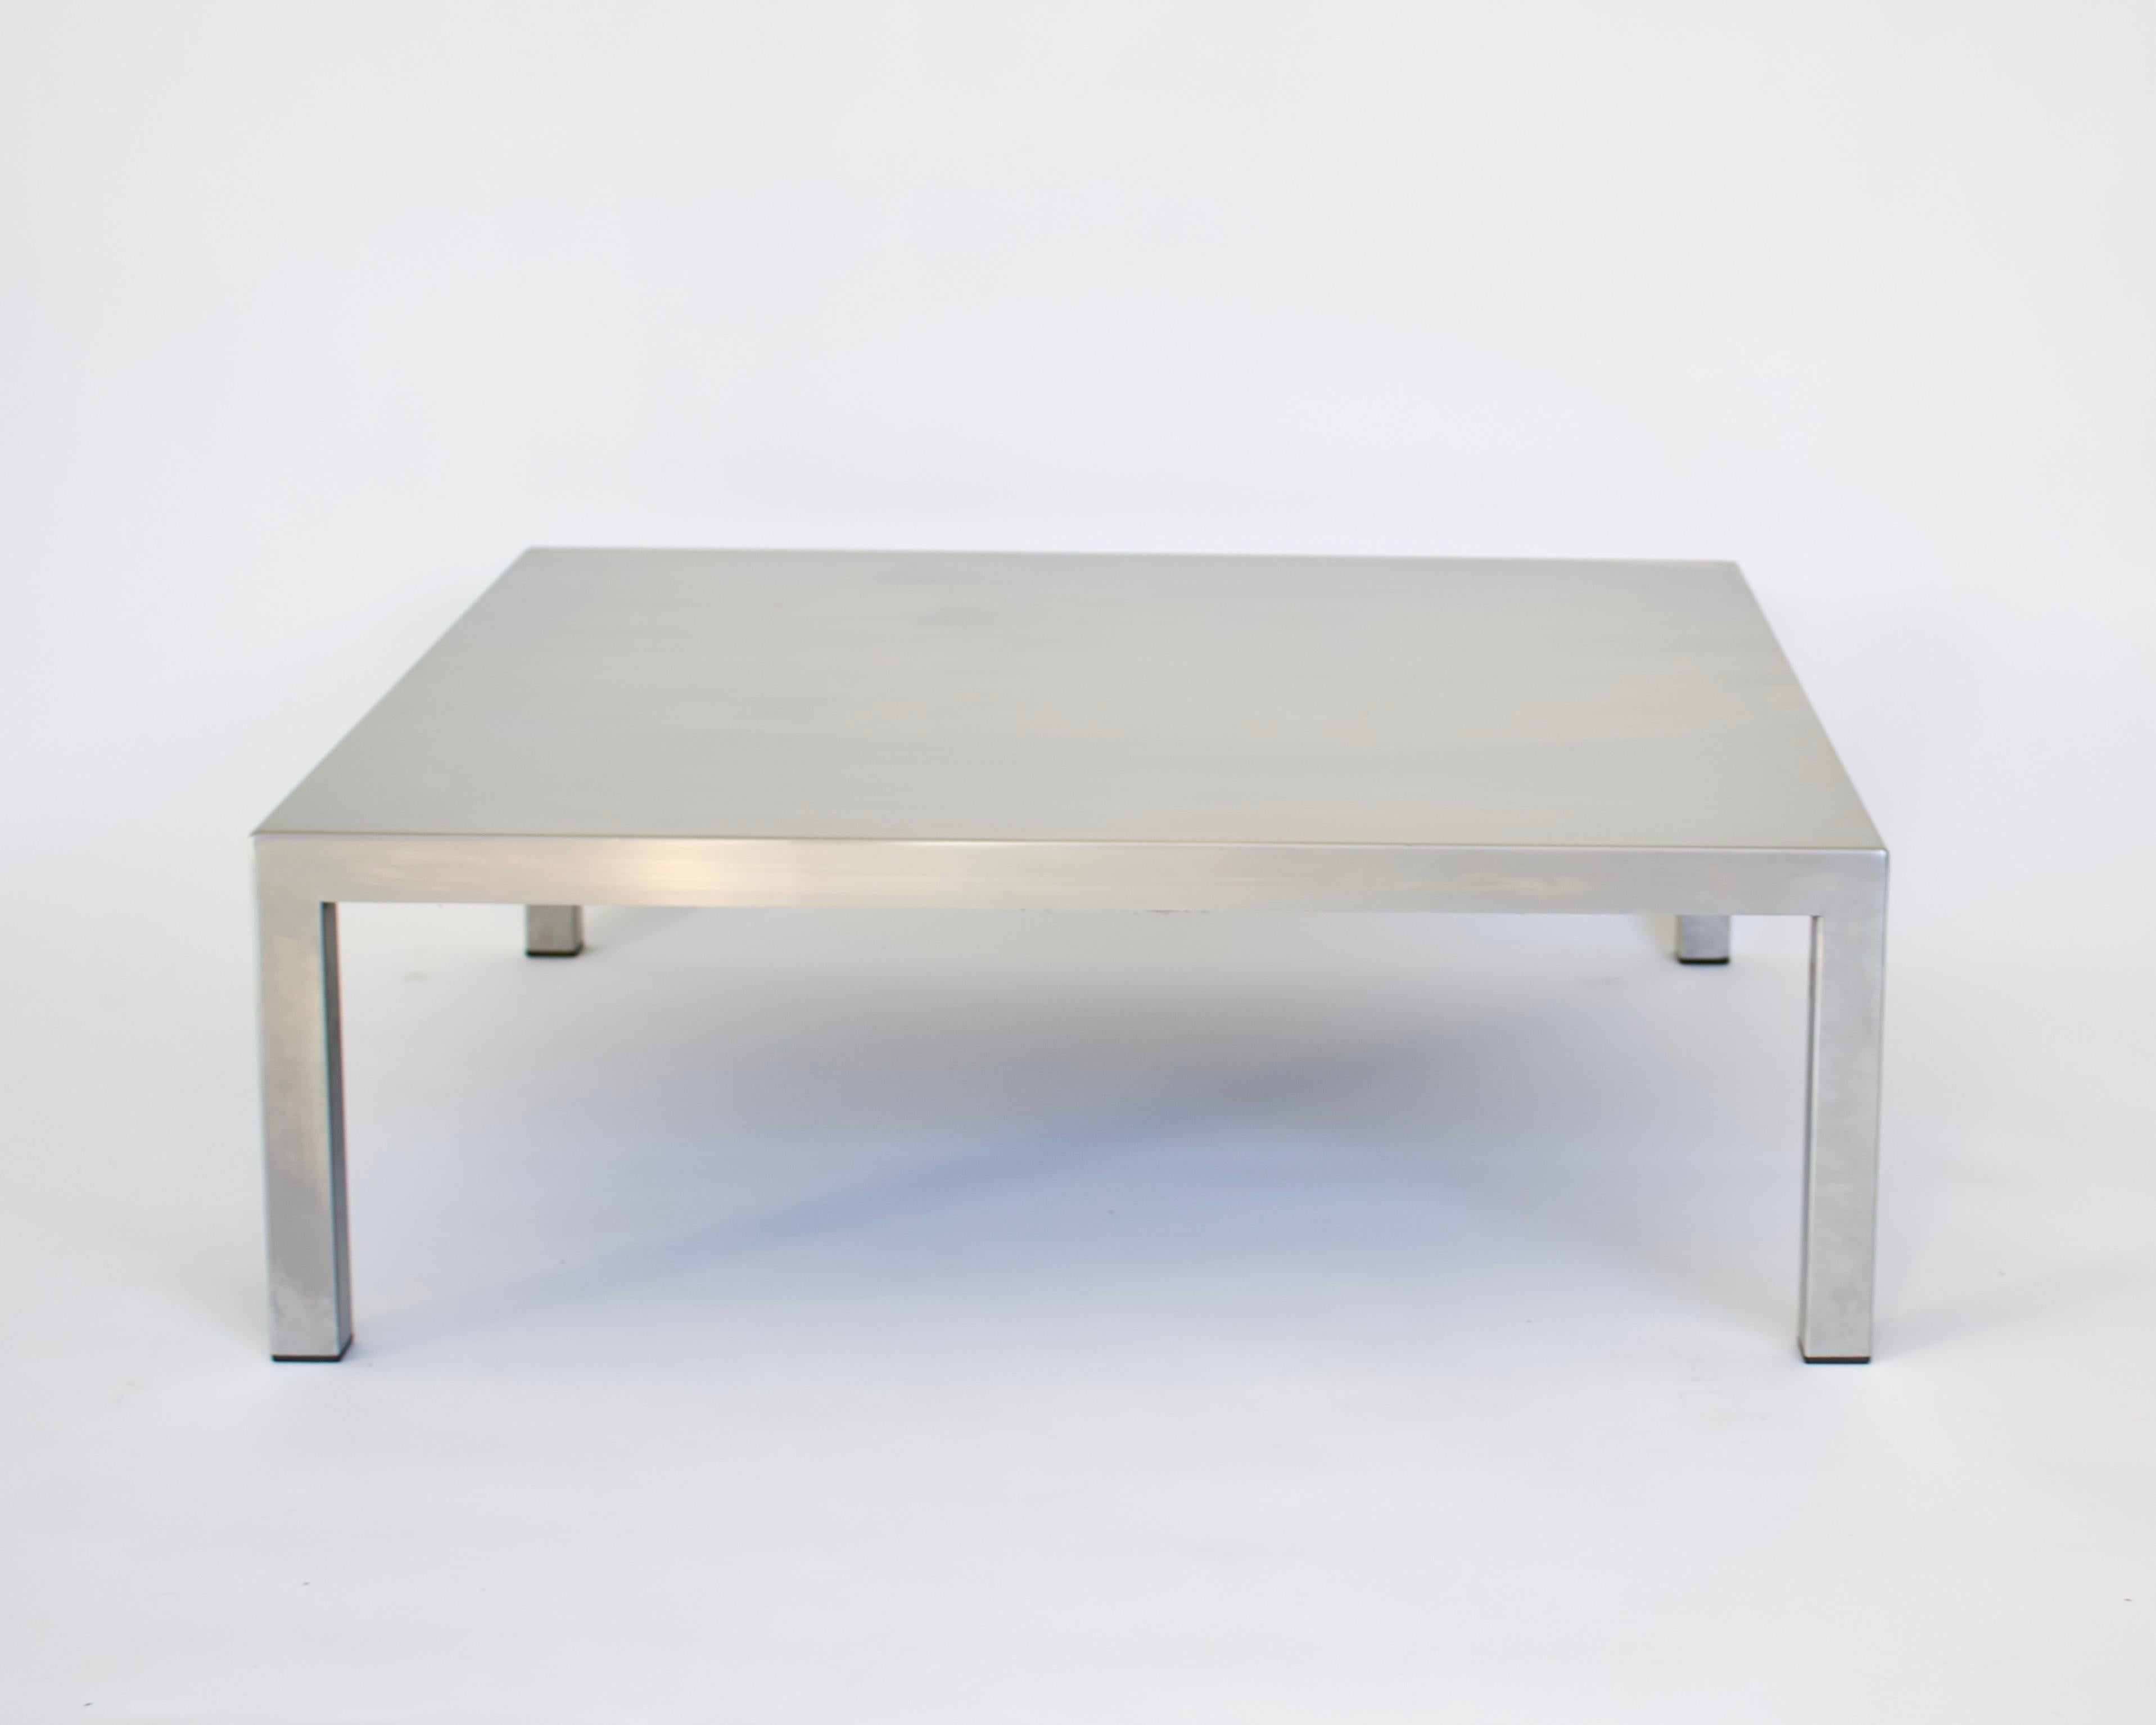 Maria Pergay Square French Stainless Steel Coffee Table, circa 1970 For Sale 1